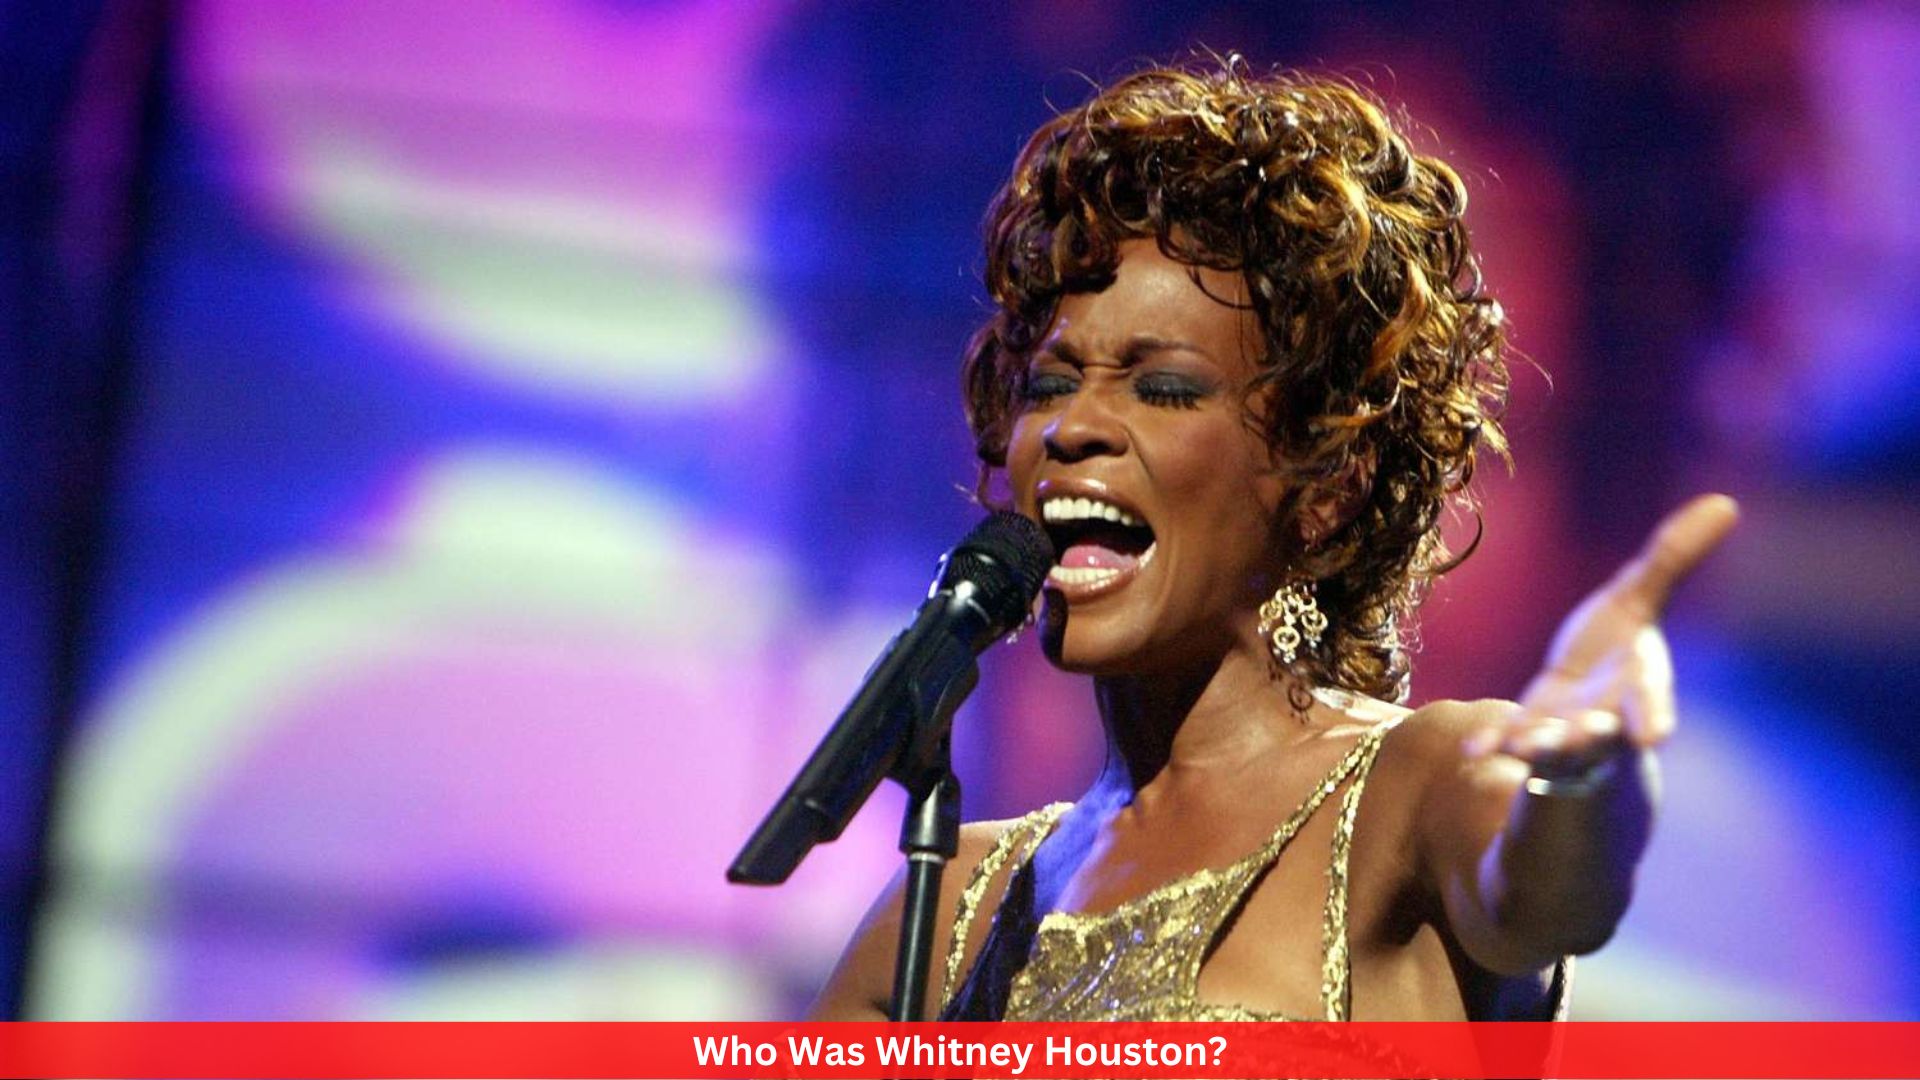 Who Was Whitney Houston? Complete Information!